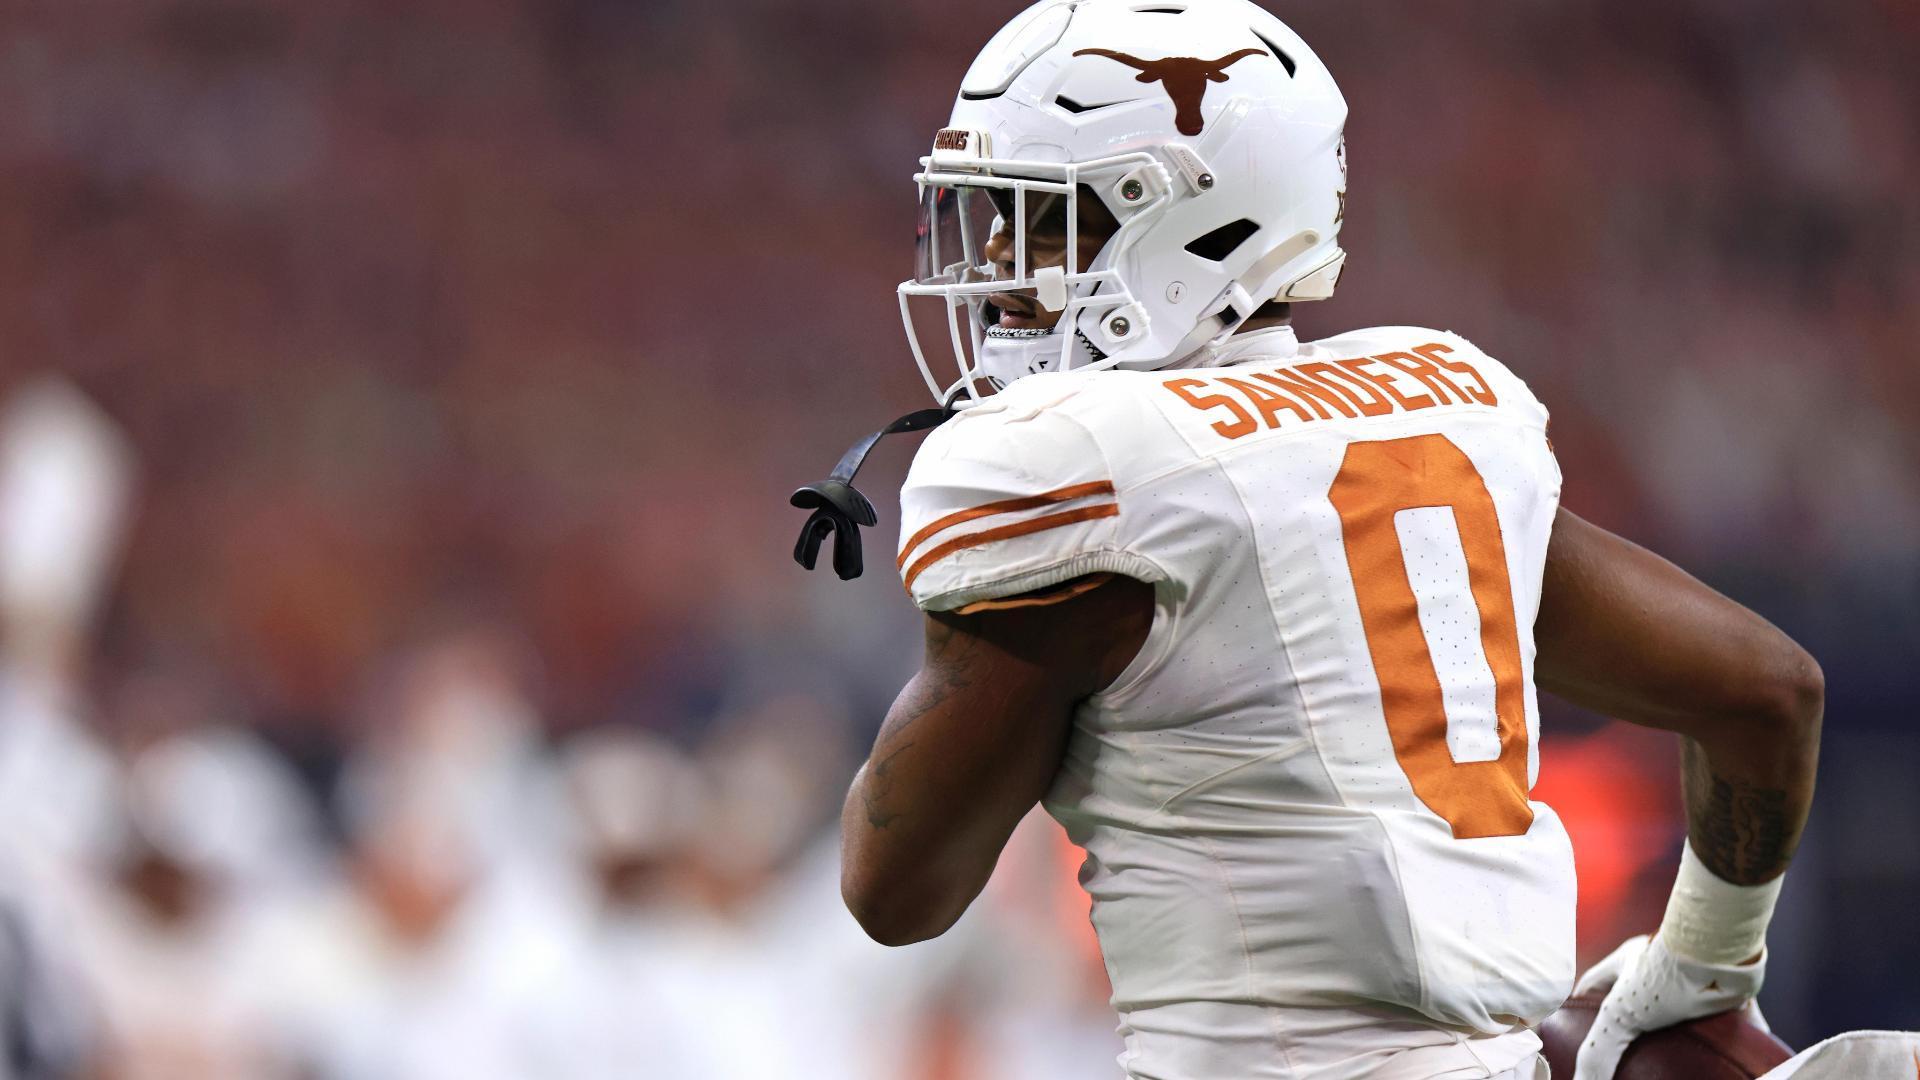 Texas' flea-flicker works to perfection for a TD